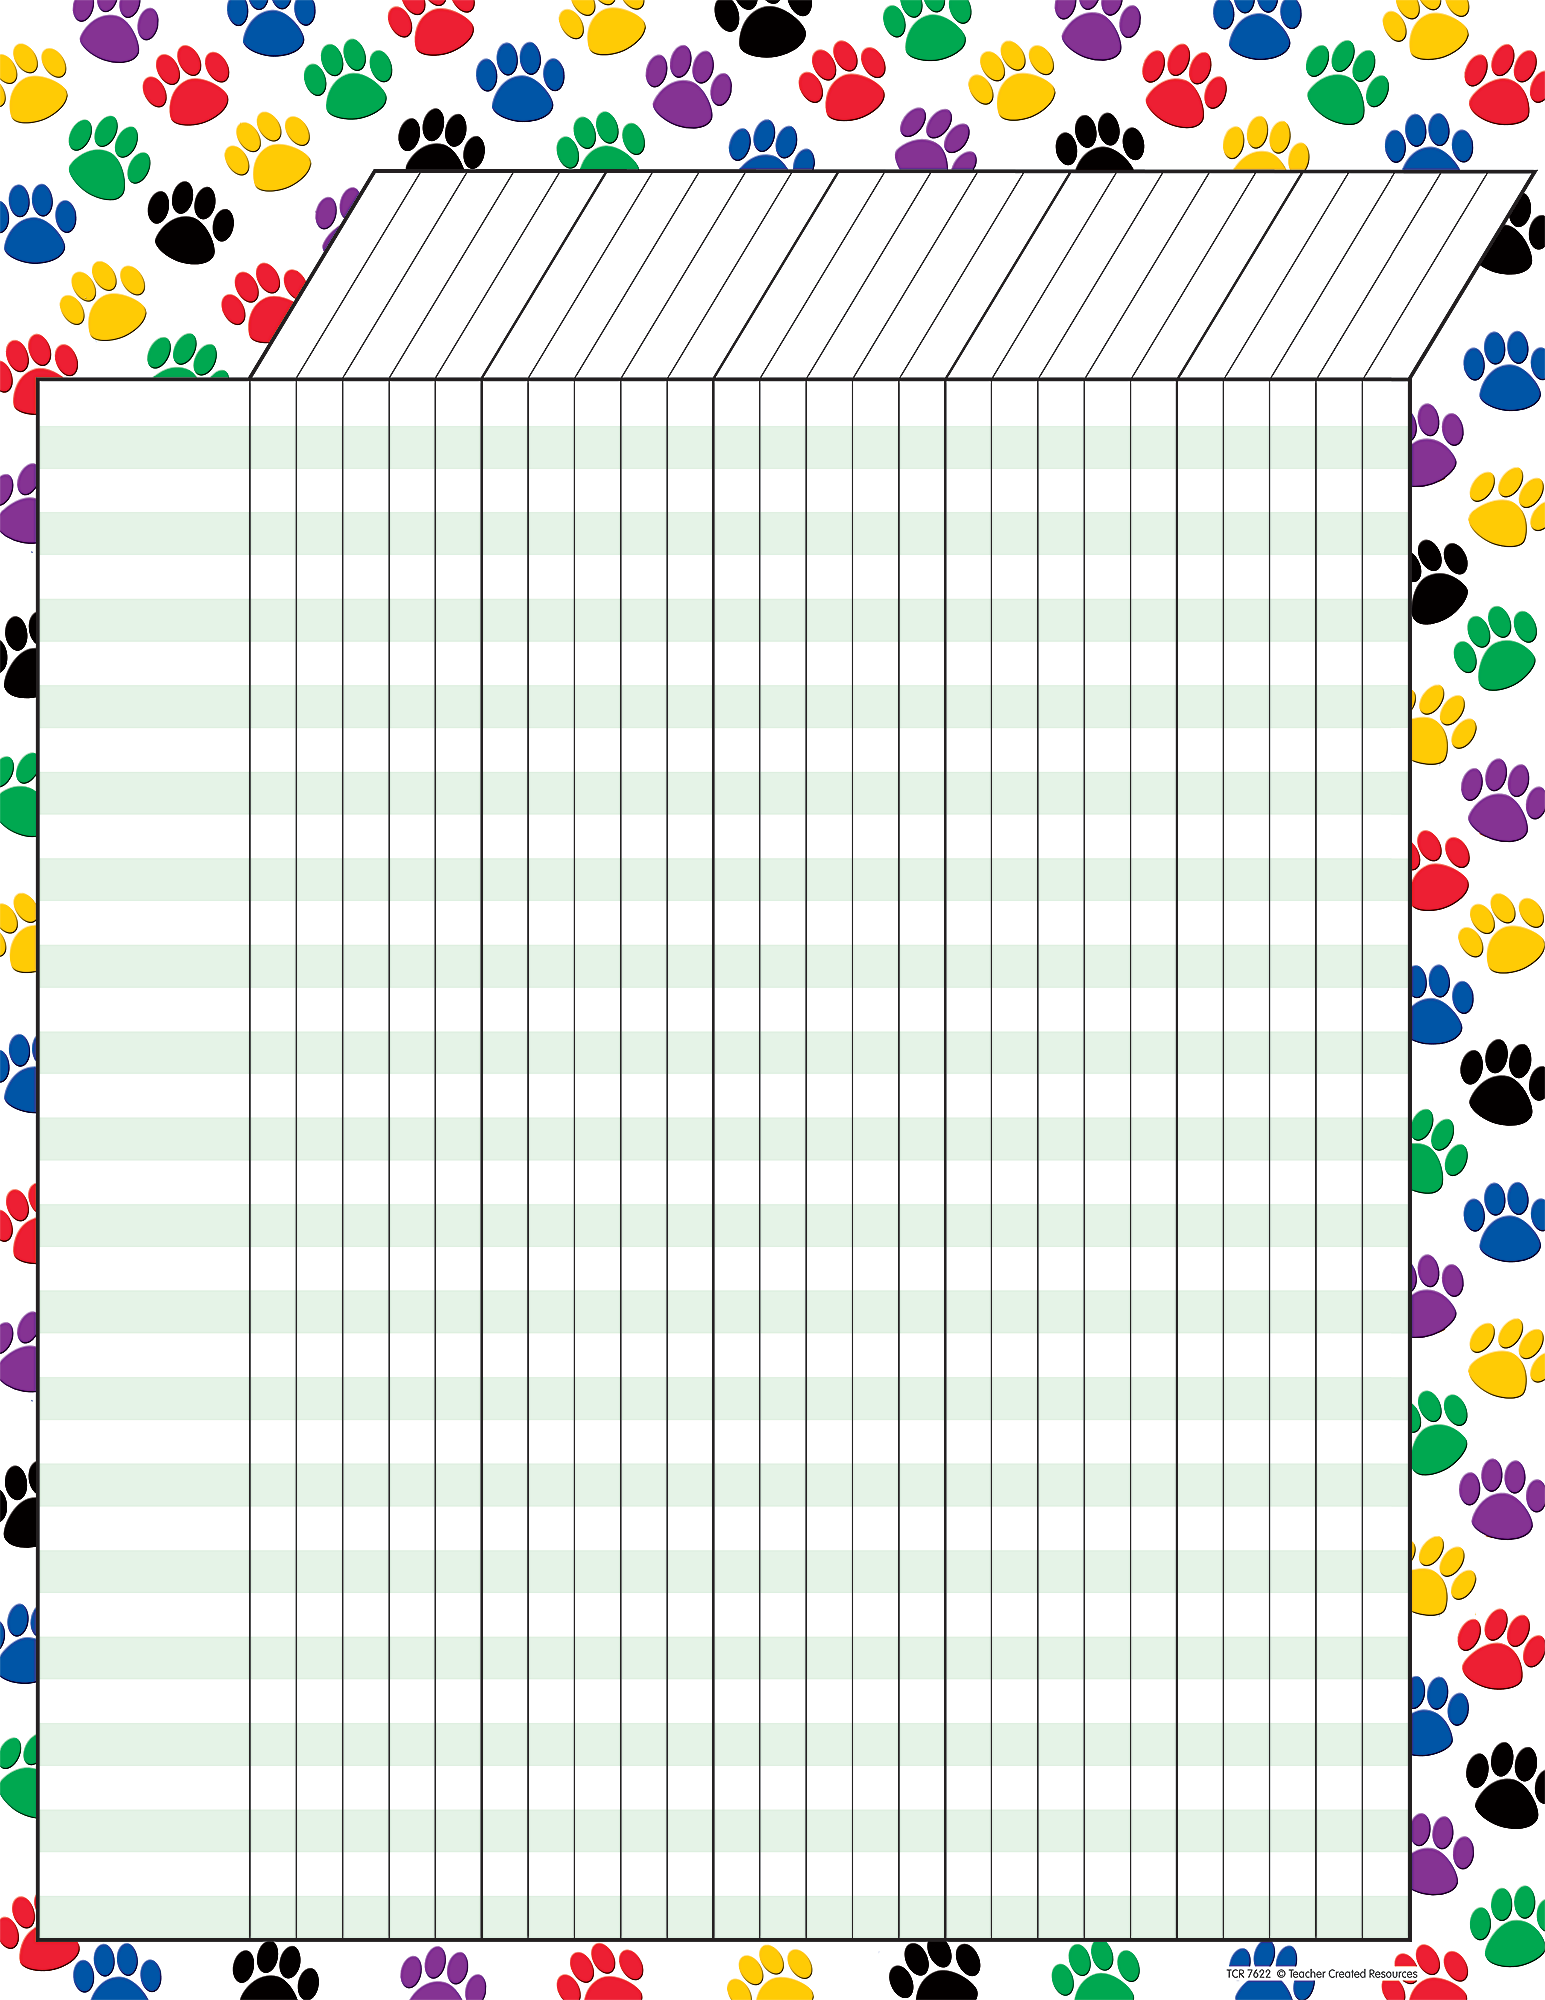 Colorful Paw Prints Incentive Chart